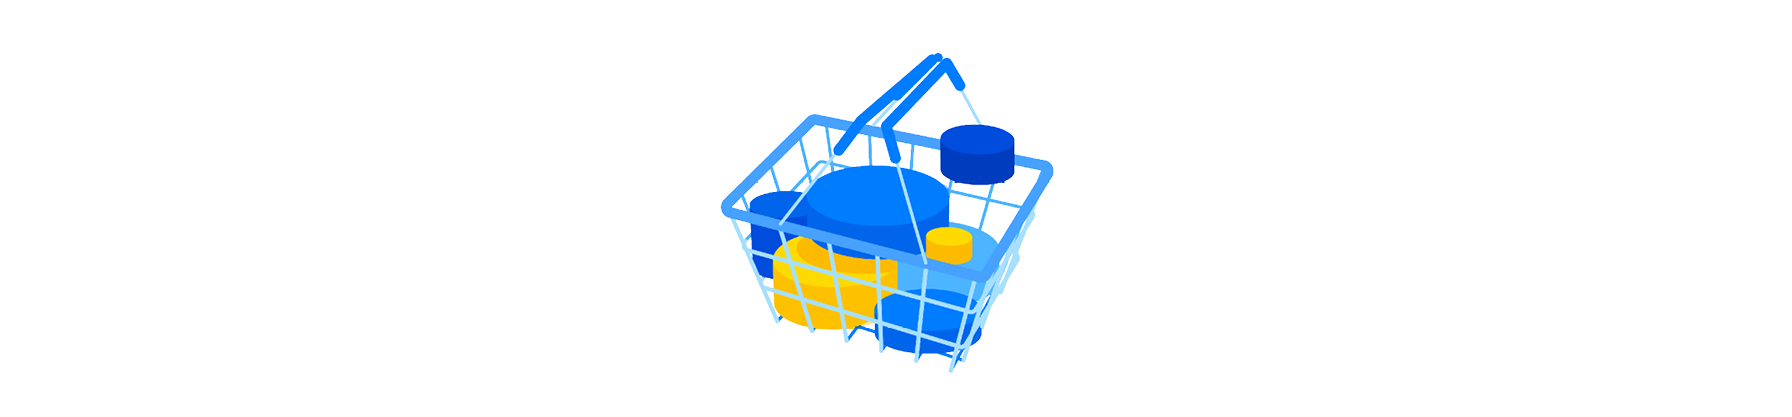 Illustrated icon of a shopping basket